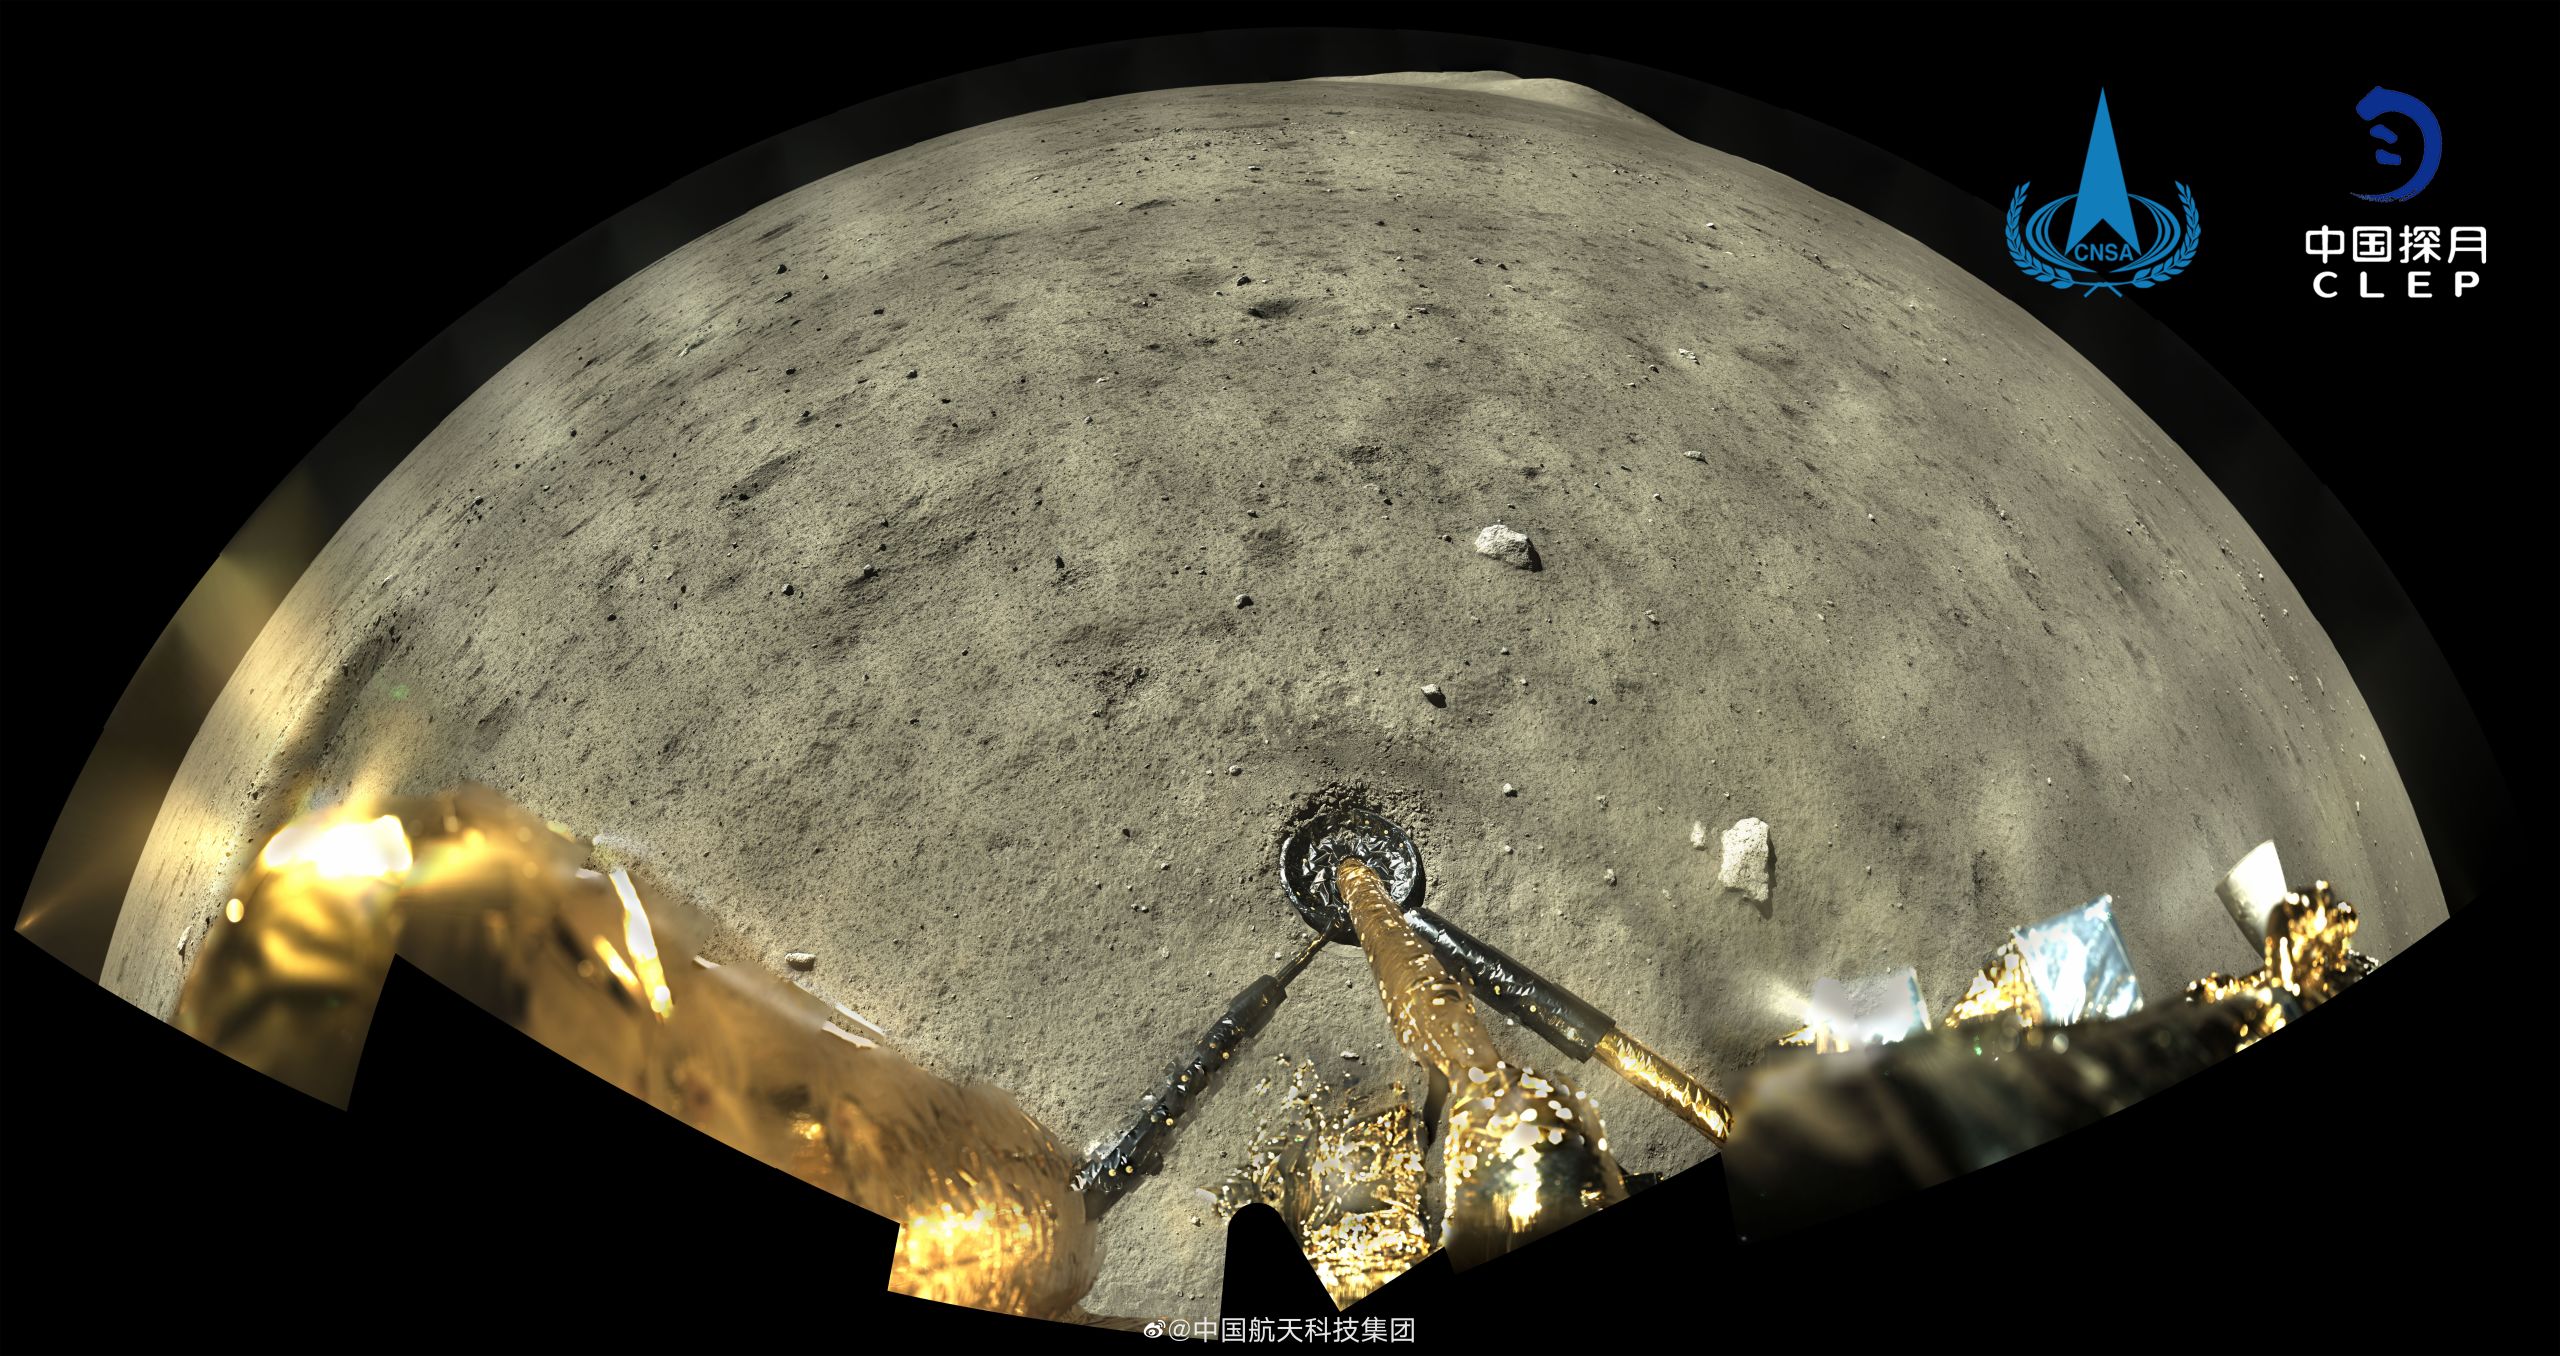 A panoramic image of the moon's surface taken by Chang'e-5, which brought back the glass beads. /CNSA/CLEP
